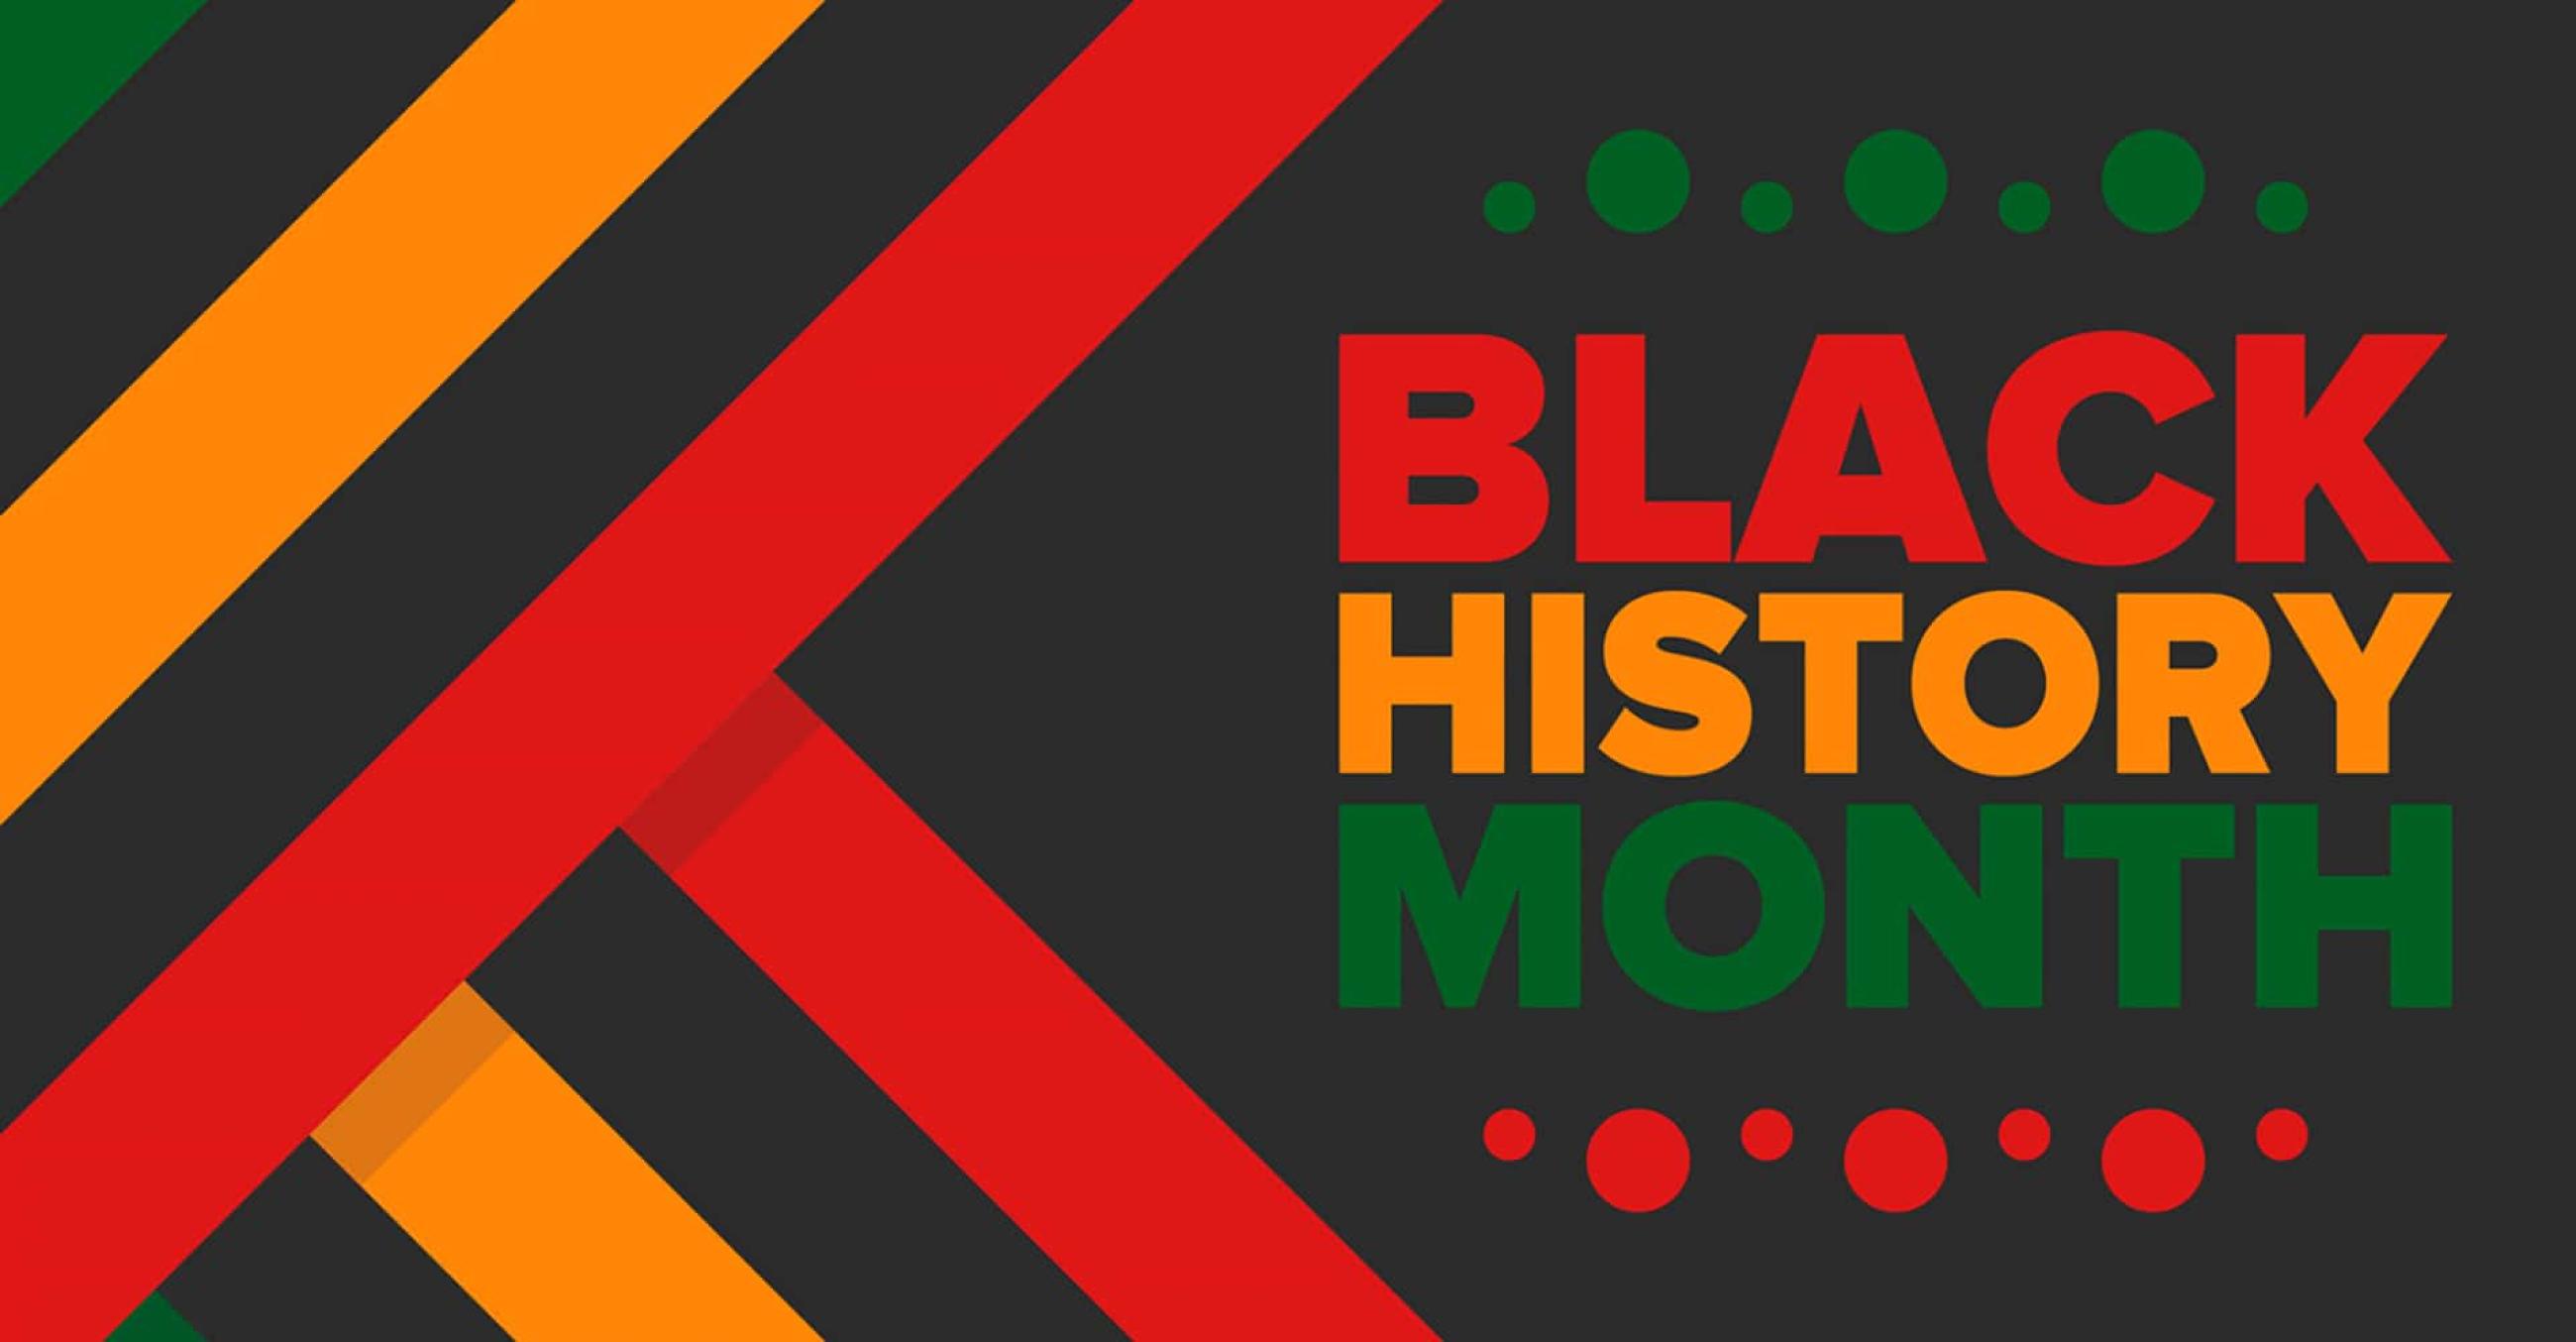 a black,red, green, and orange graphic, with the words "BLACK HISTORY MONTH"